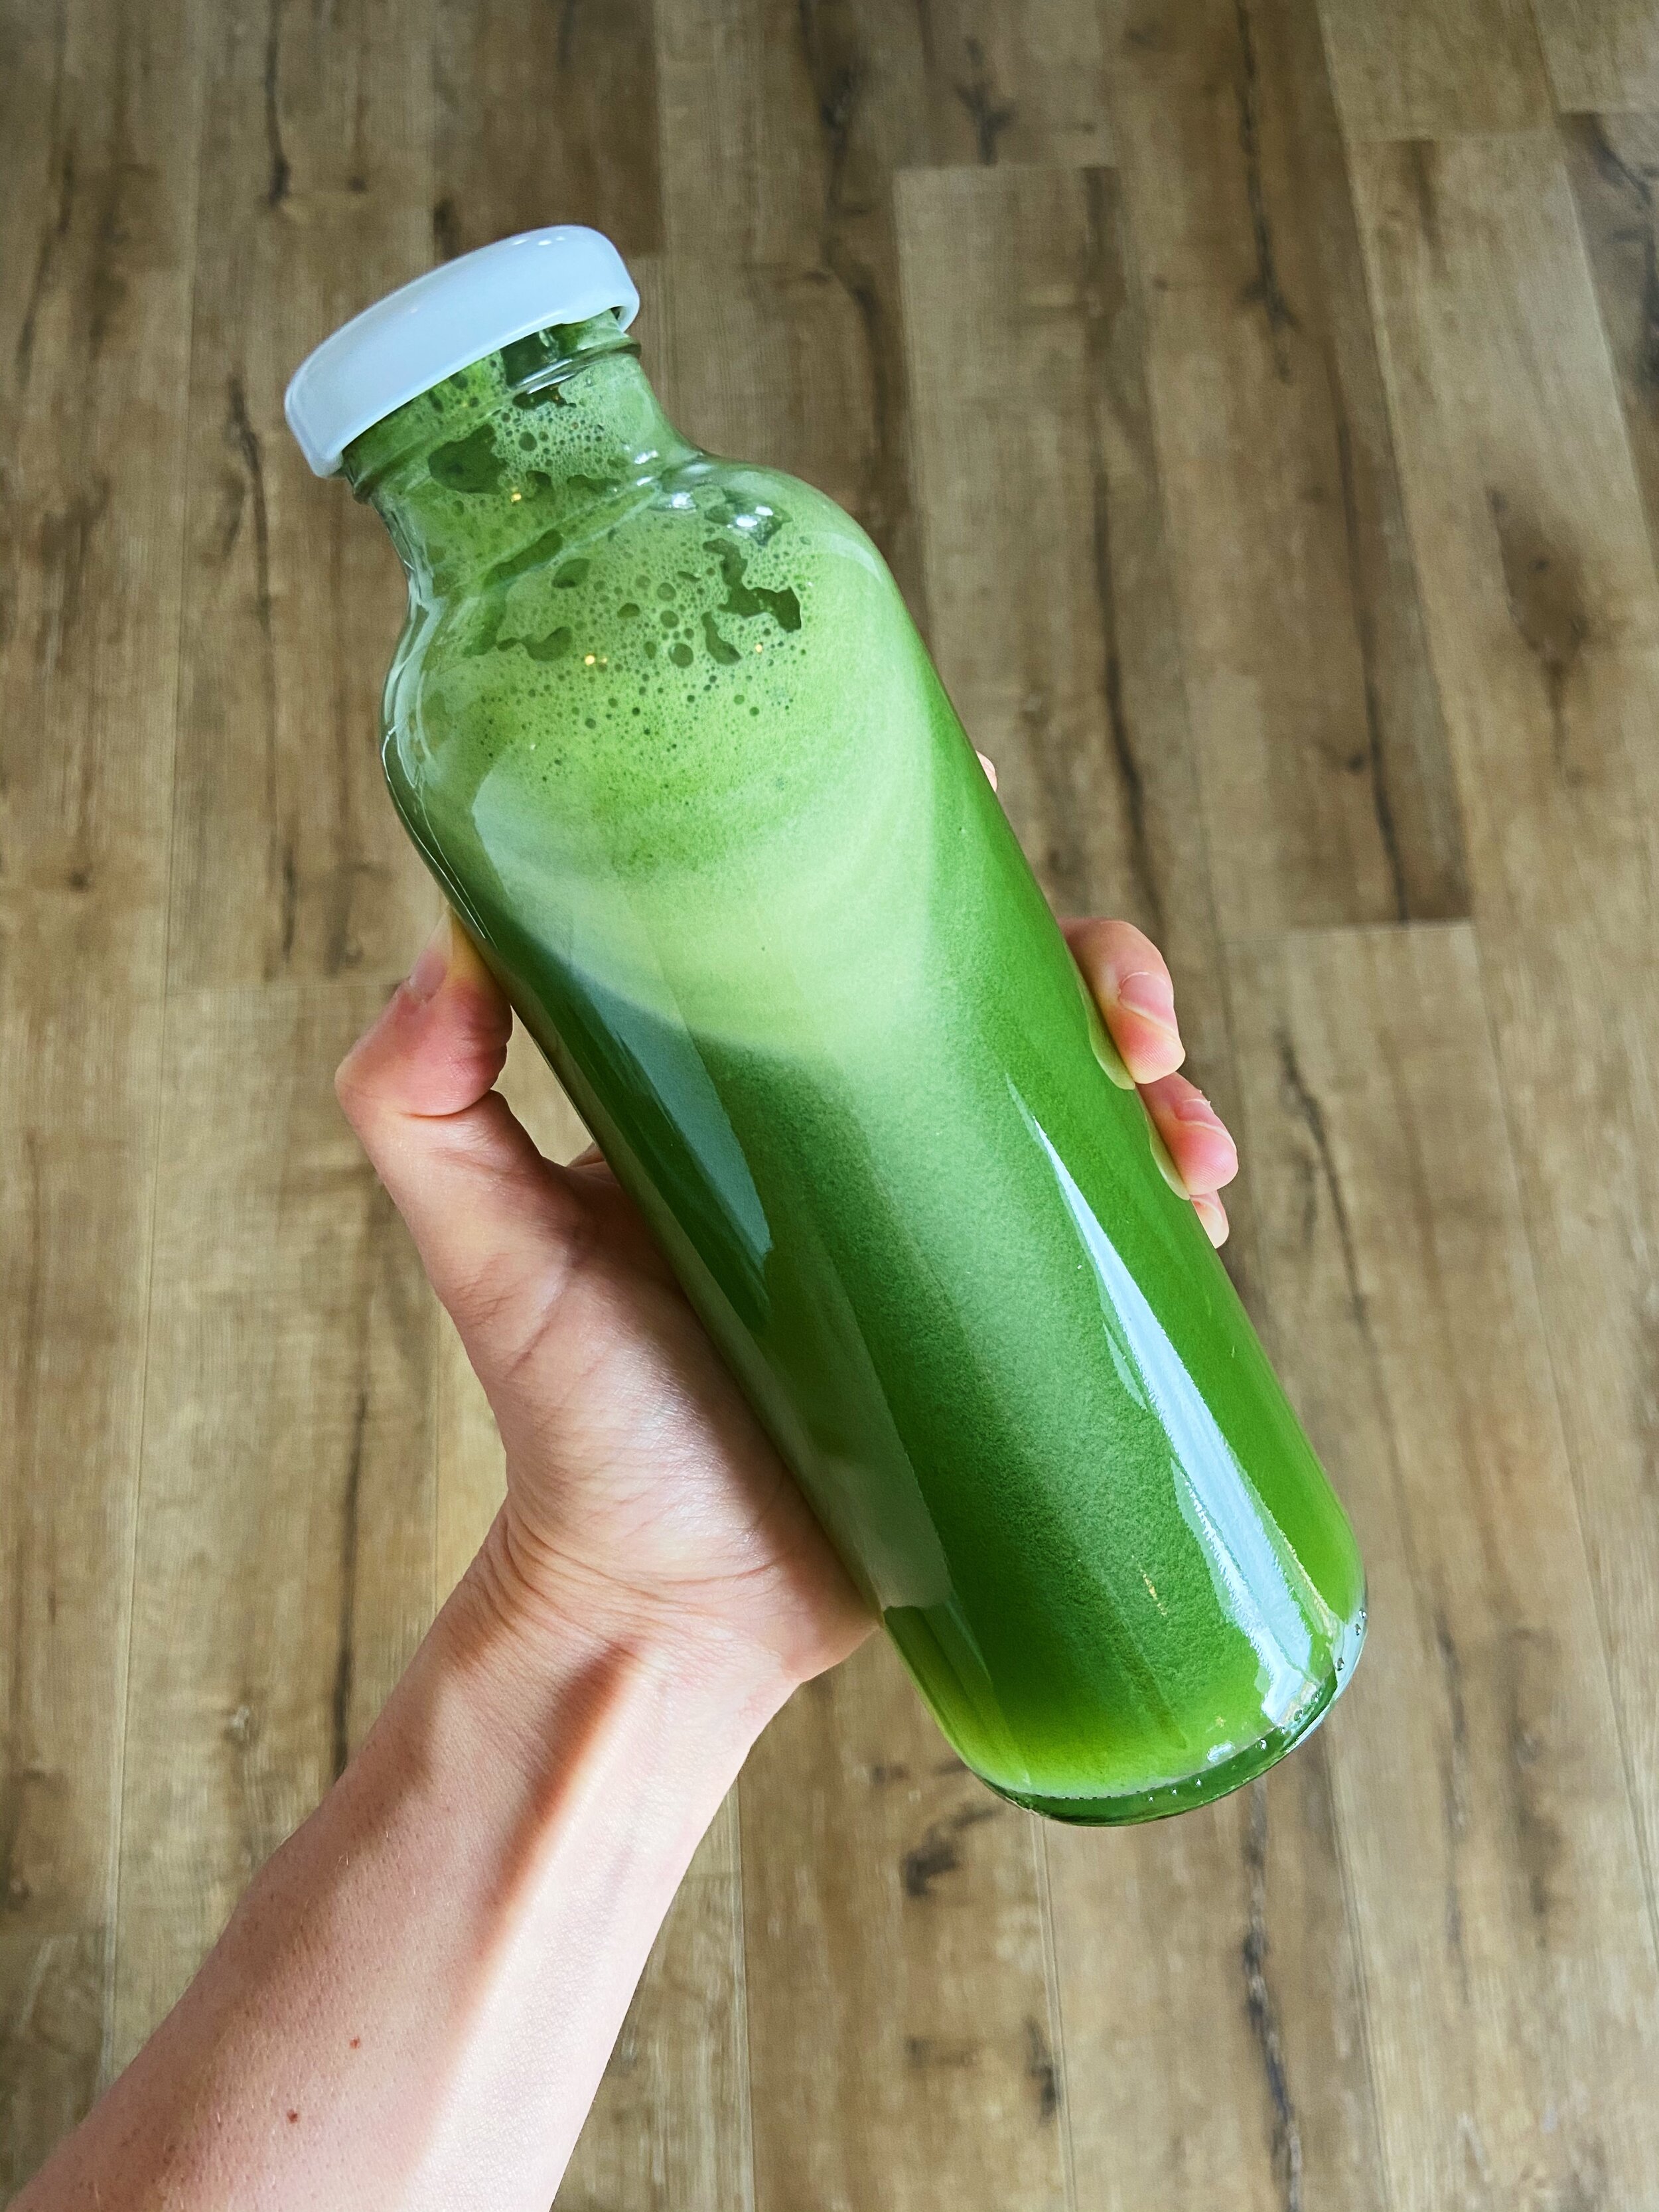 All you need to know to make the perfect green juice + my favorite